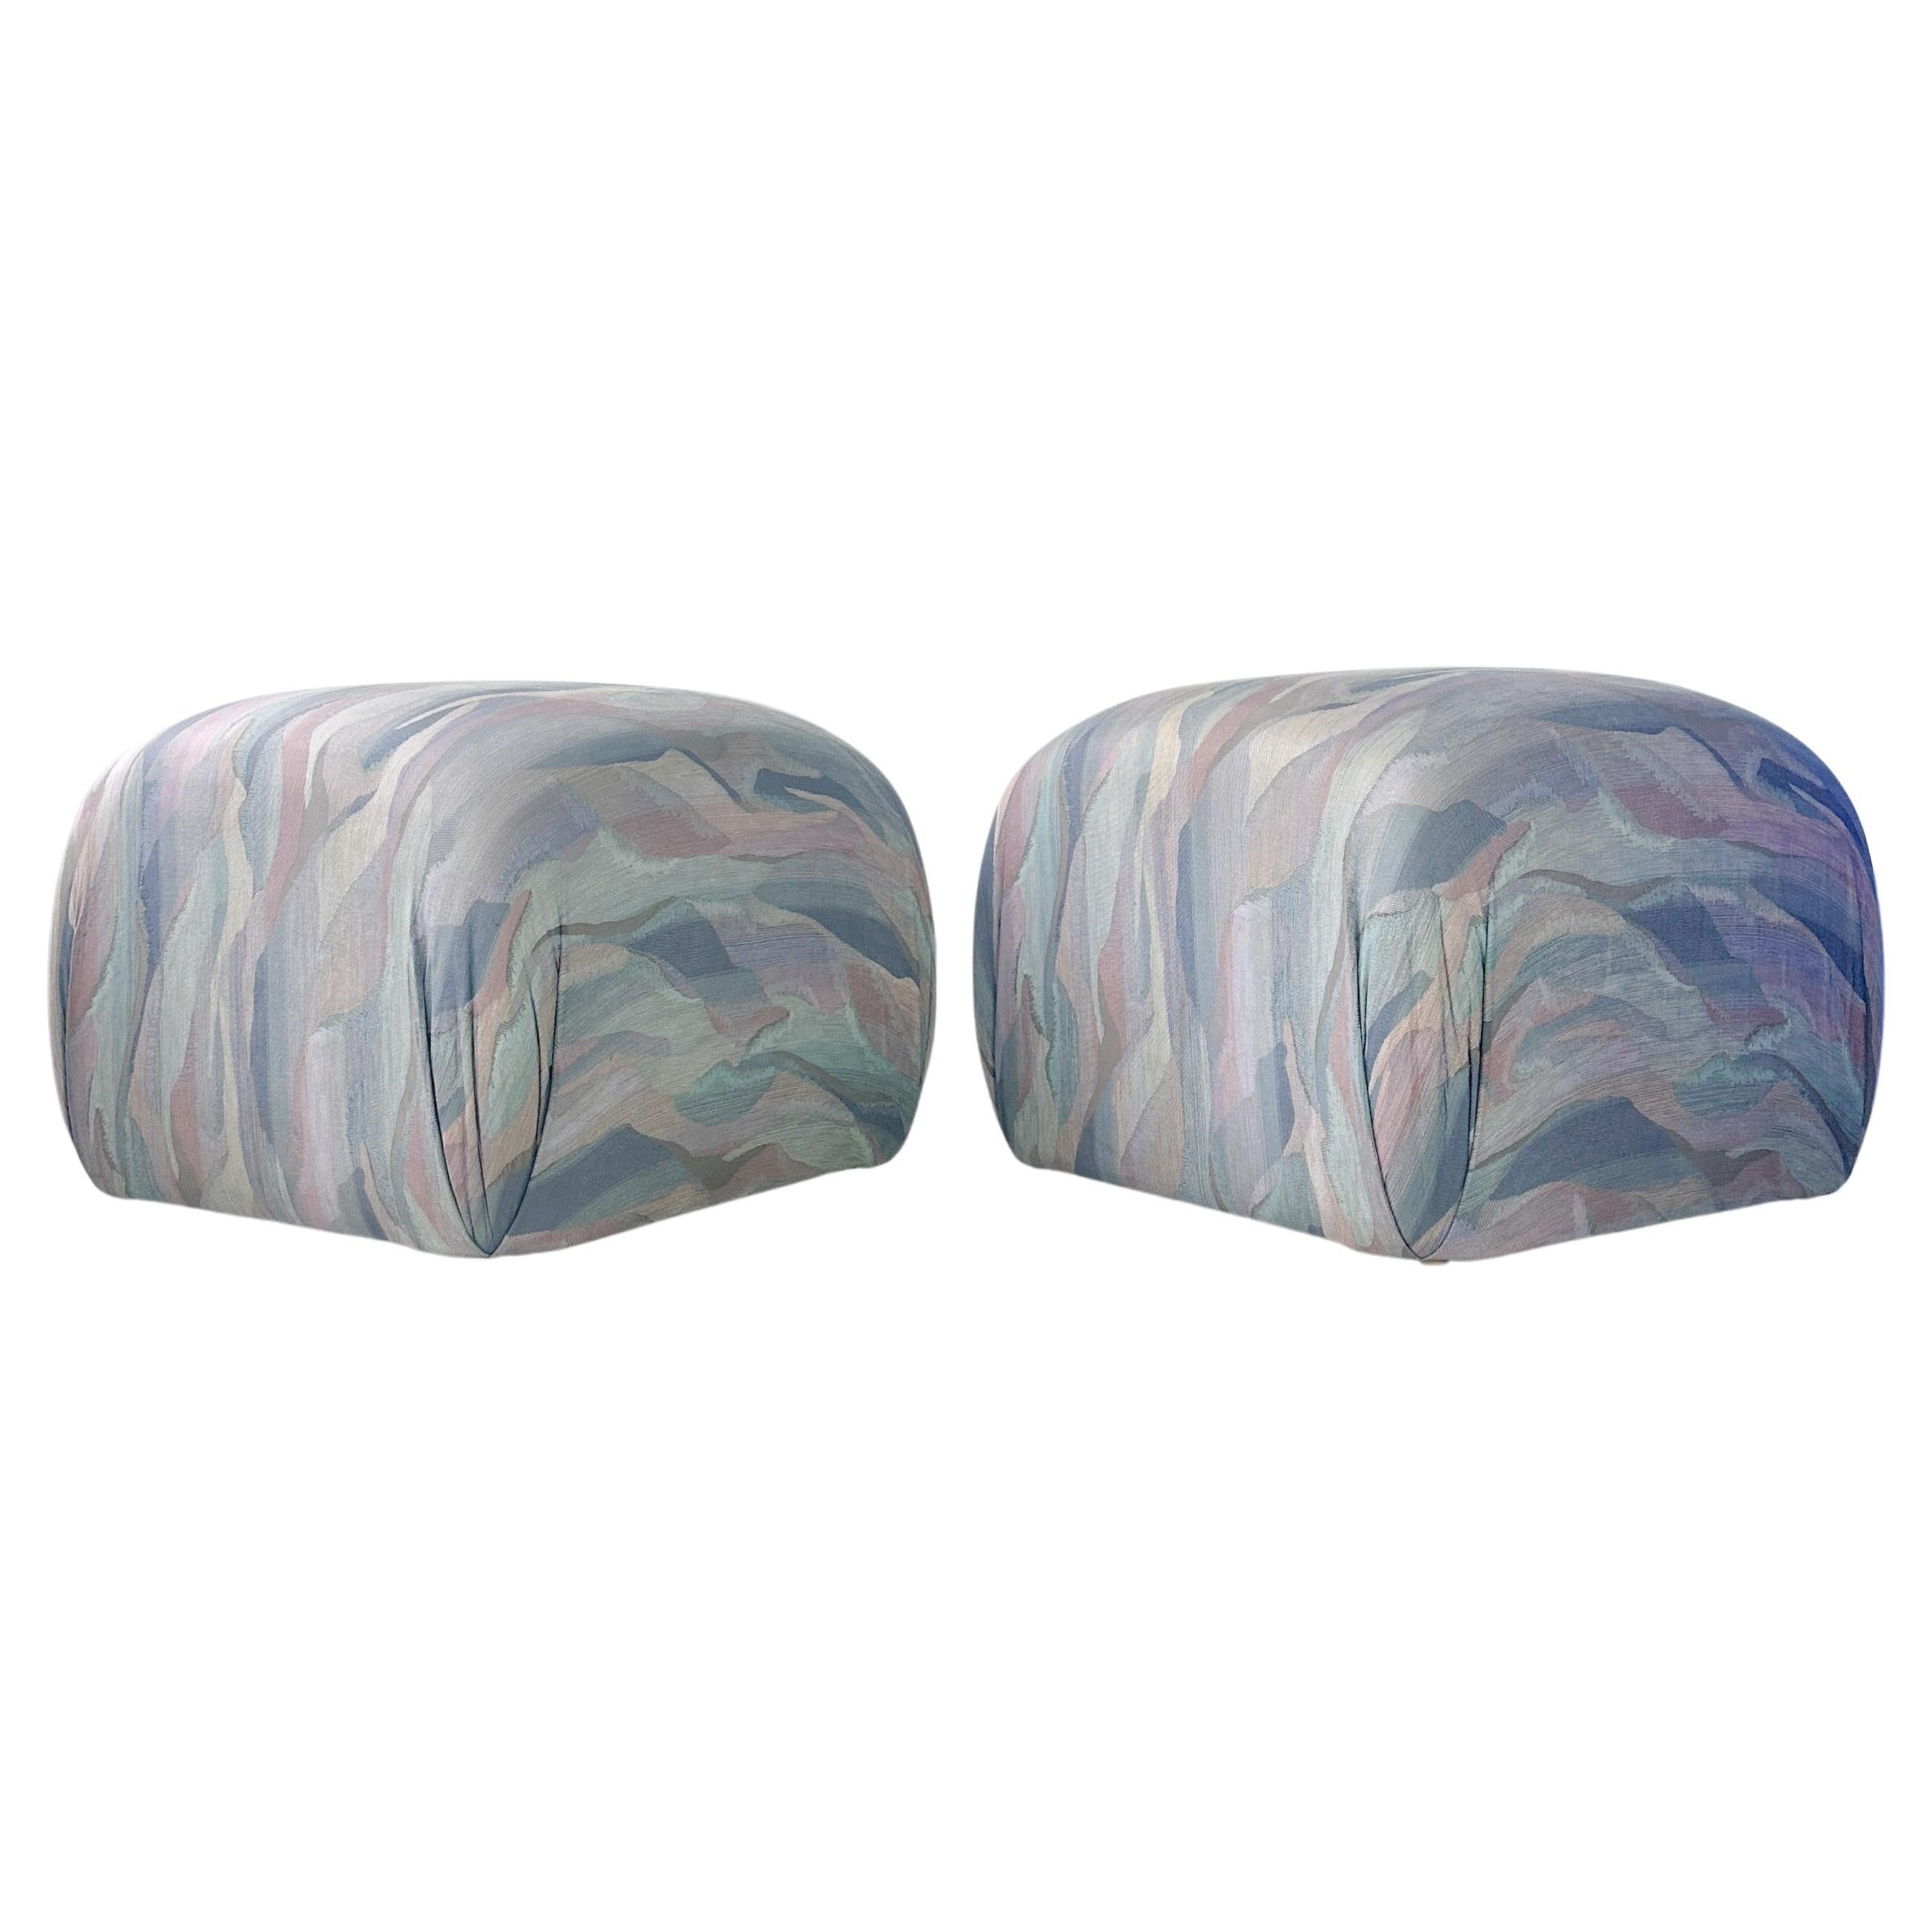 Vintage circa 1980s Karl Springer attributed soufflé pouf ottomans. Cube shaped with rounded edges and in original found fabric. Fabric has shades of pink, blues and greens.